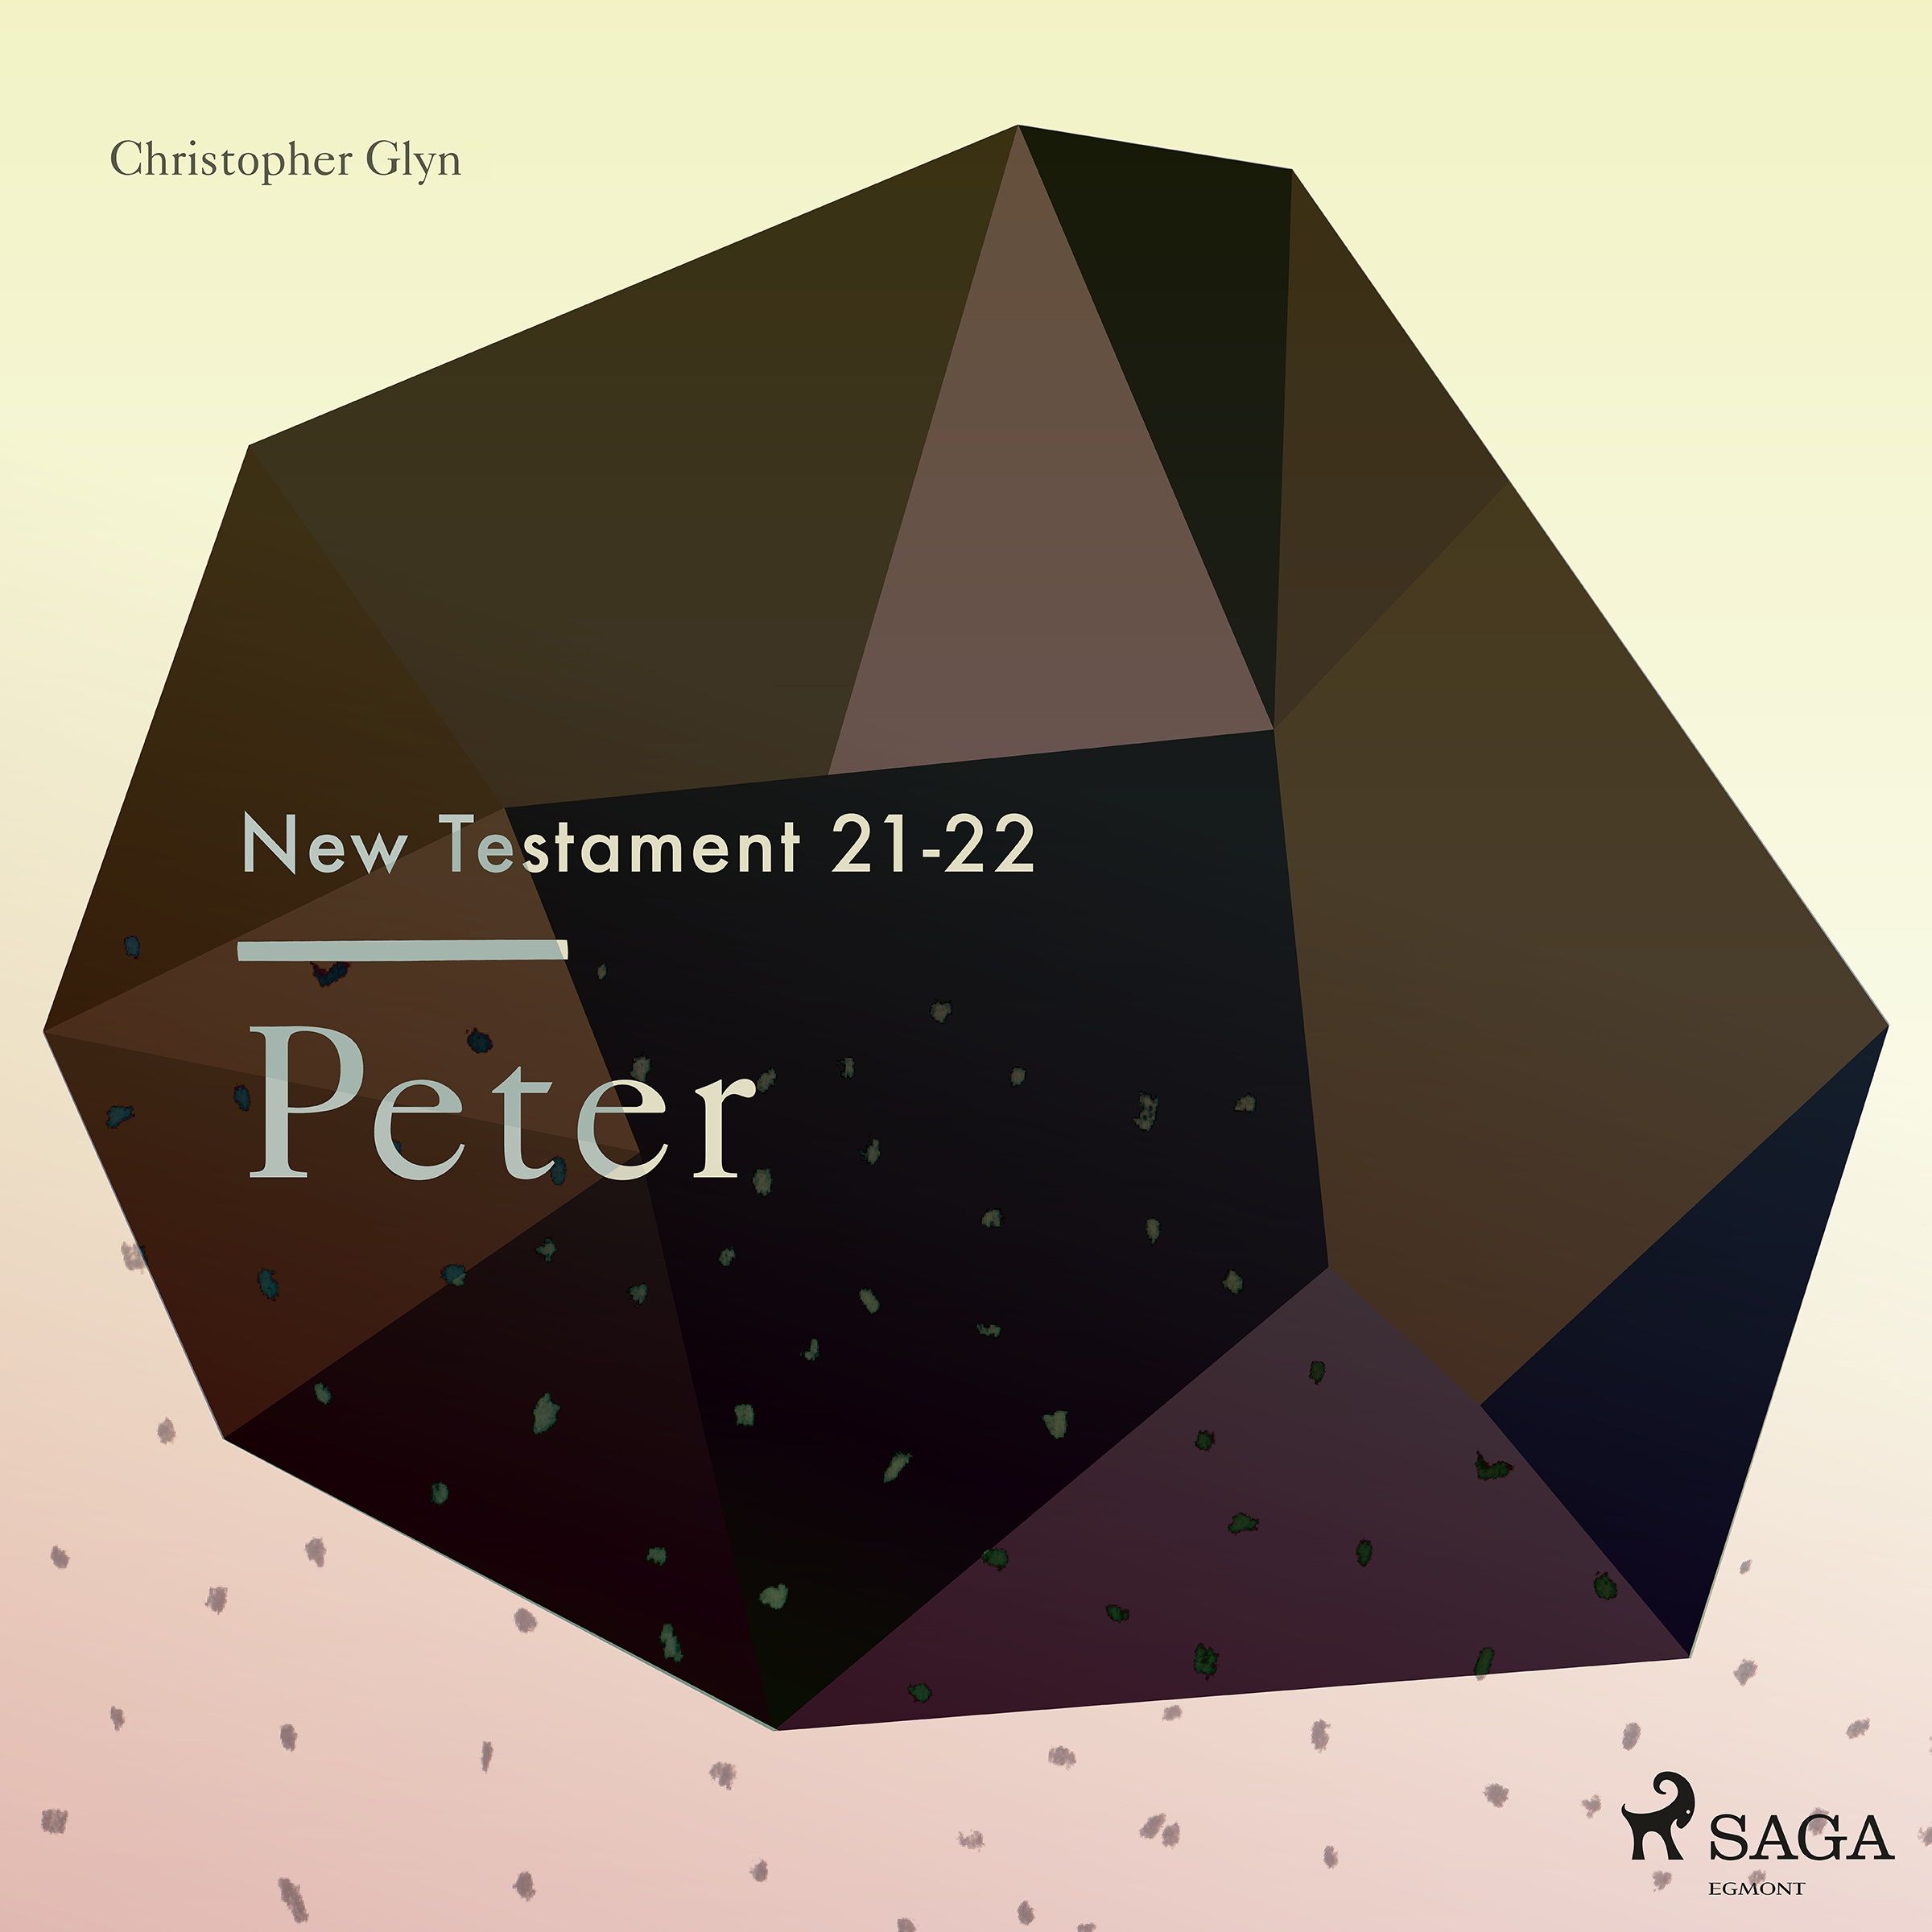 The New Testament 21-22 - Peter, audiobook by Christopher Glyn